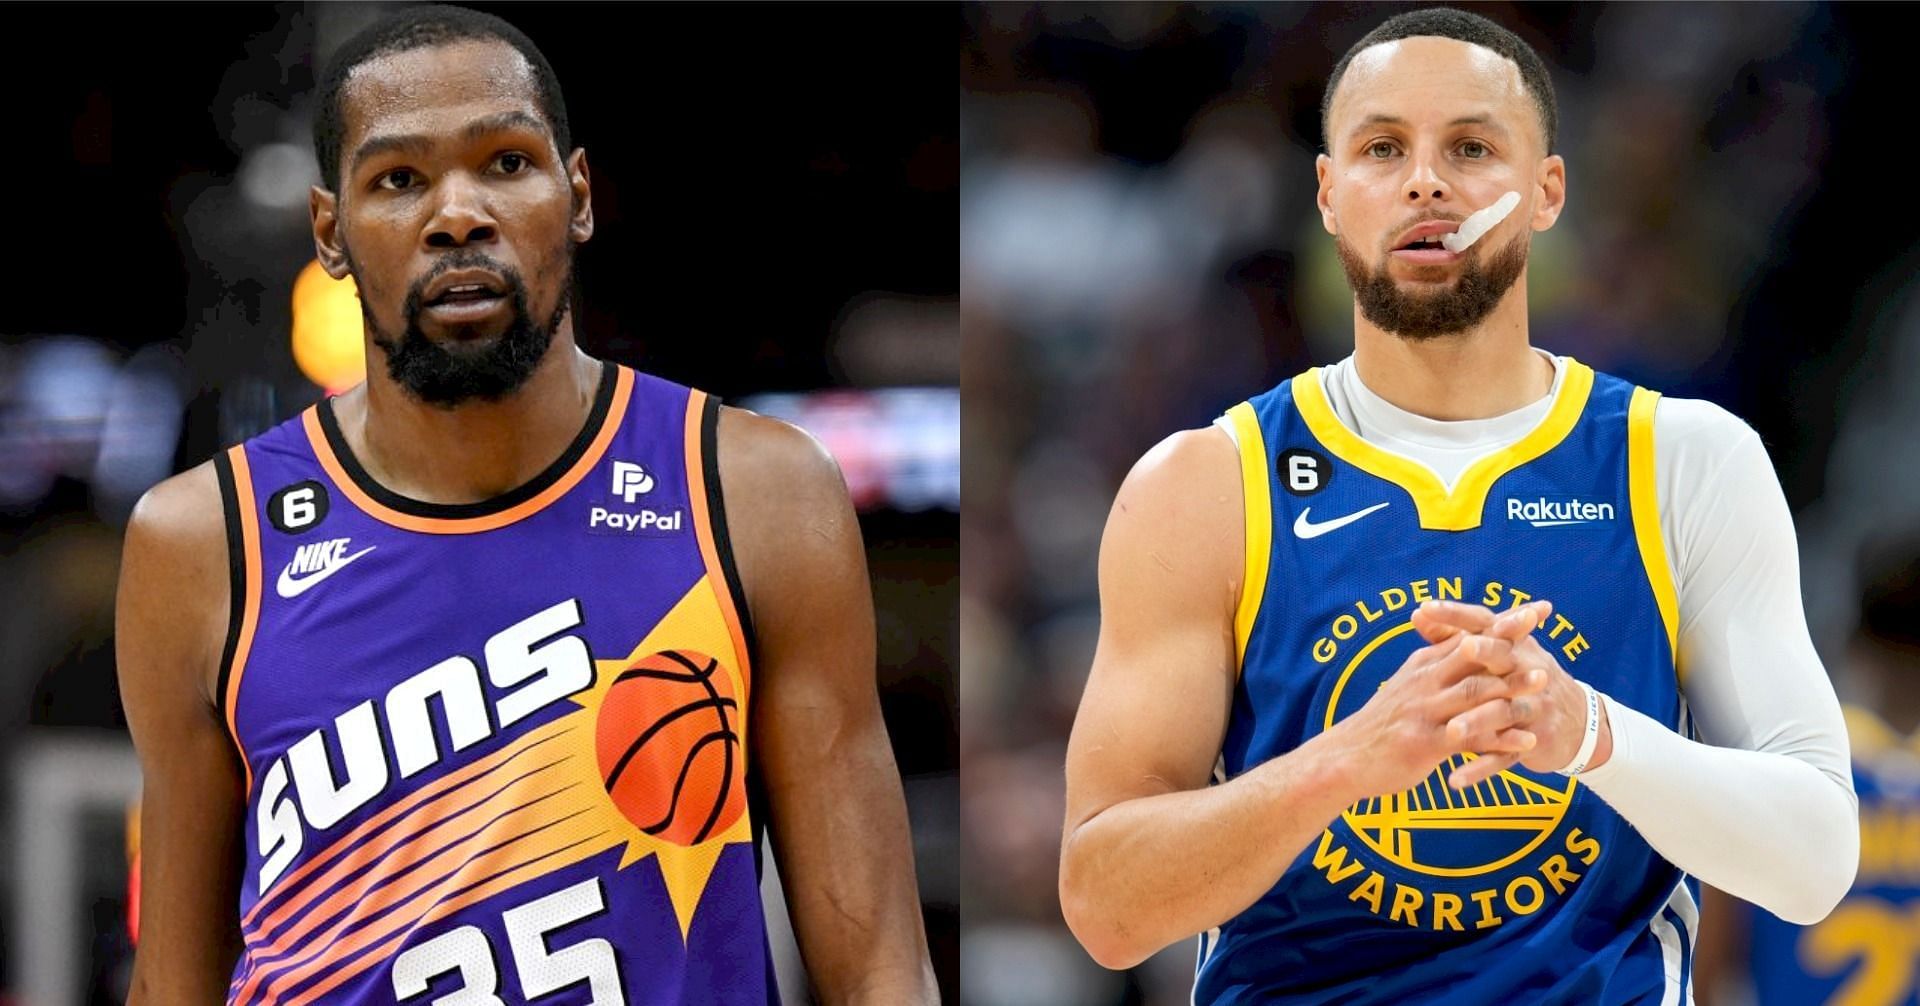 NBA superstars Kevin Durant and Steph Curry